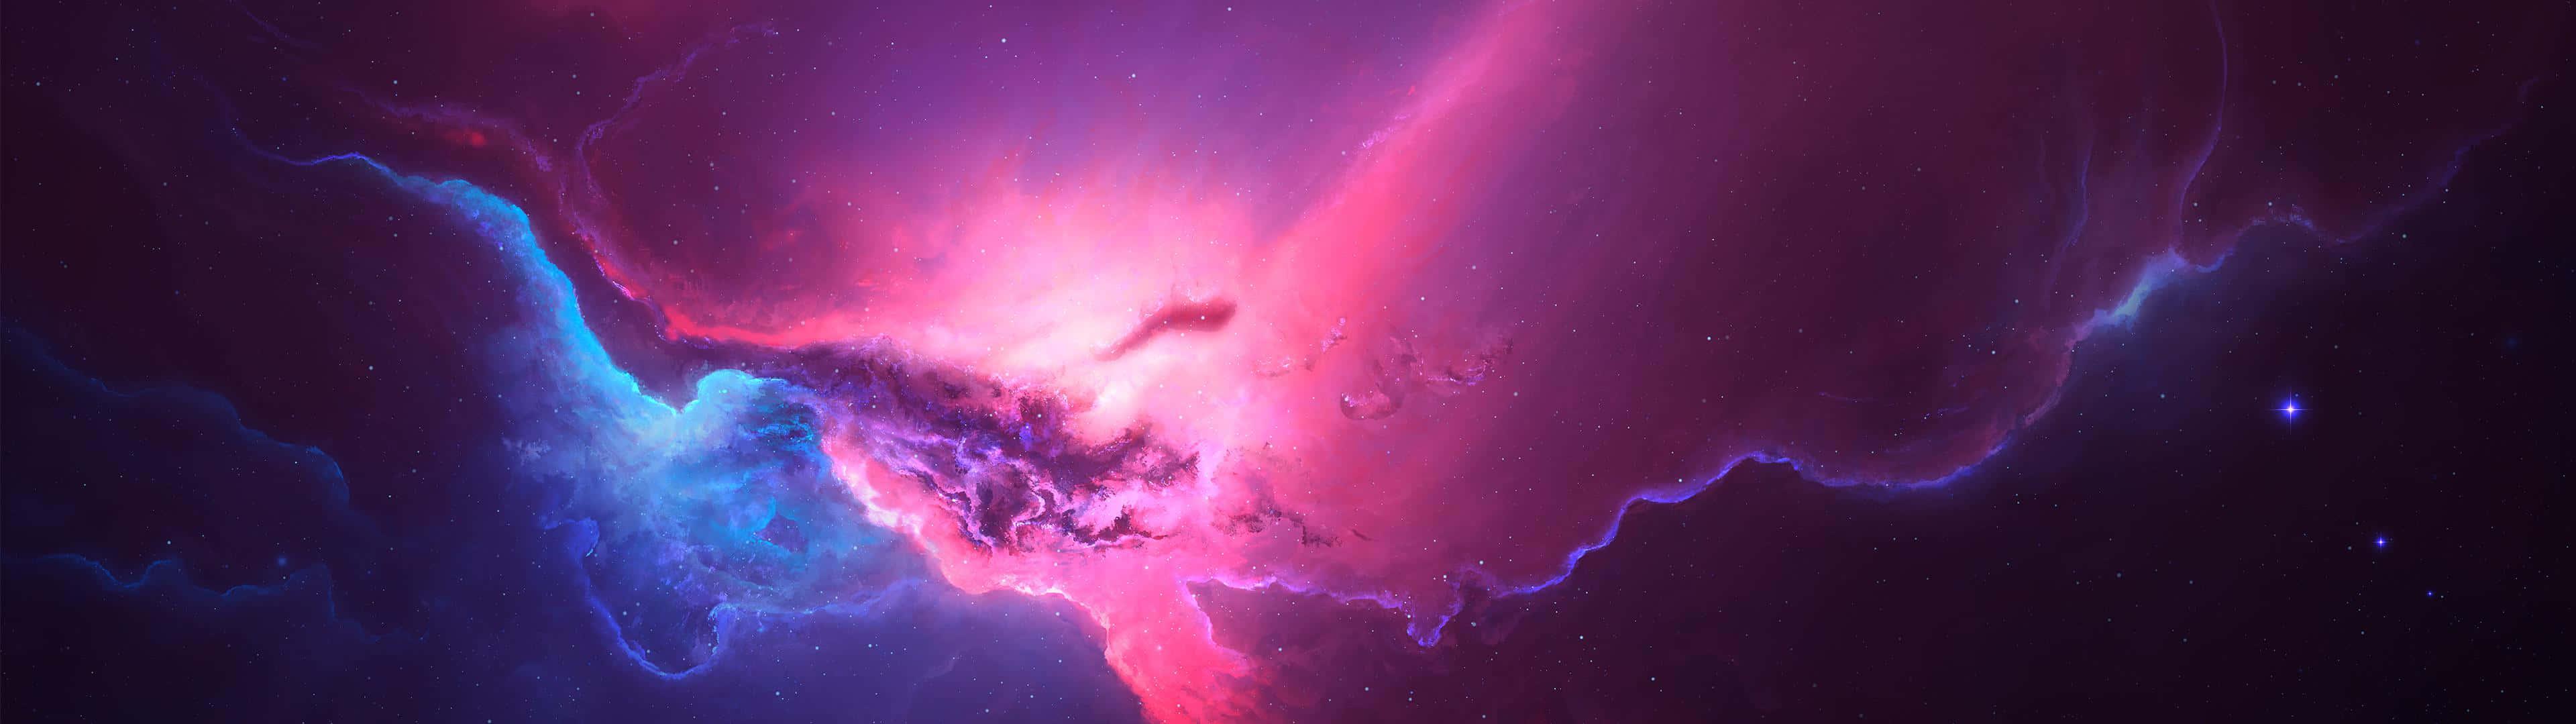 Captivating Image Of Deep Space Wallpaper